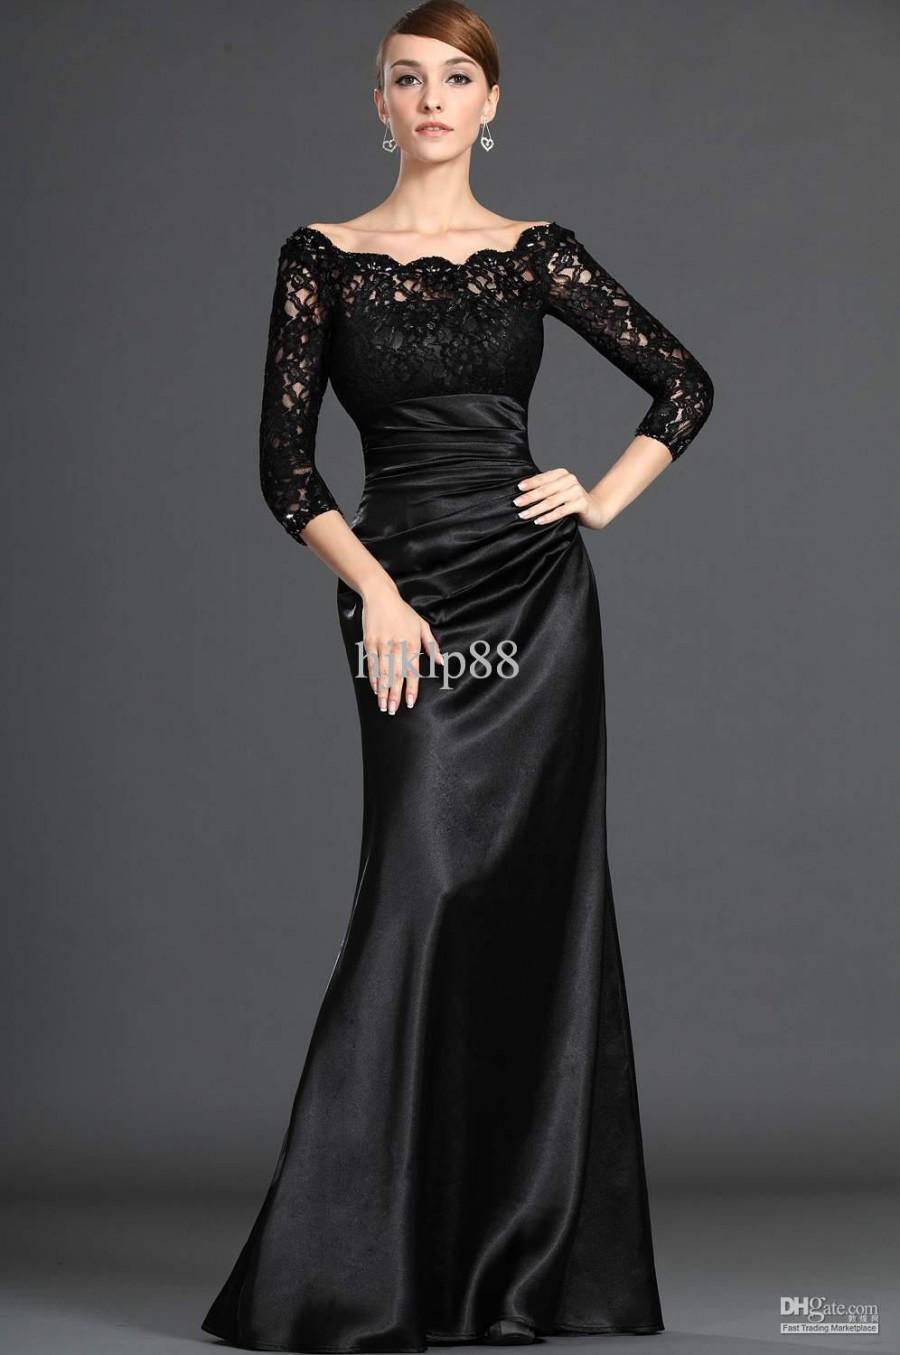 Wedding - 2014 New Custom Made Off-Shoulder 3/4Long Sleeve Black Lace Satin A-Line Mother Evening Dresses /Mother of the Bride Dresses Online with $89.26/Piece on Hjklp88's Store 